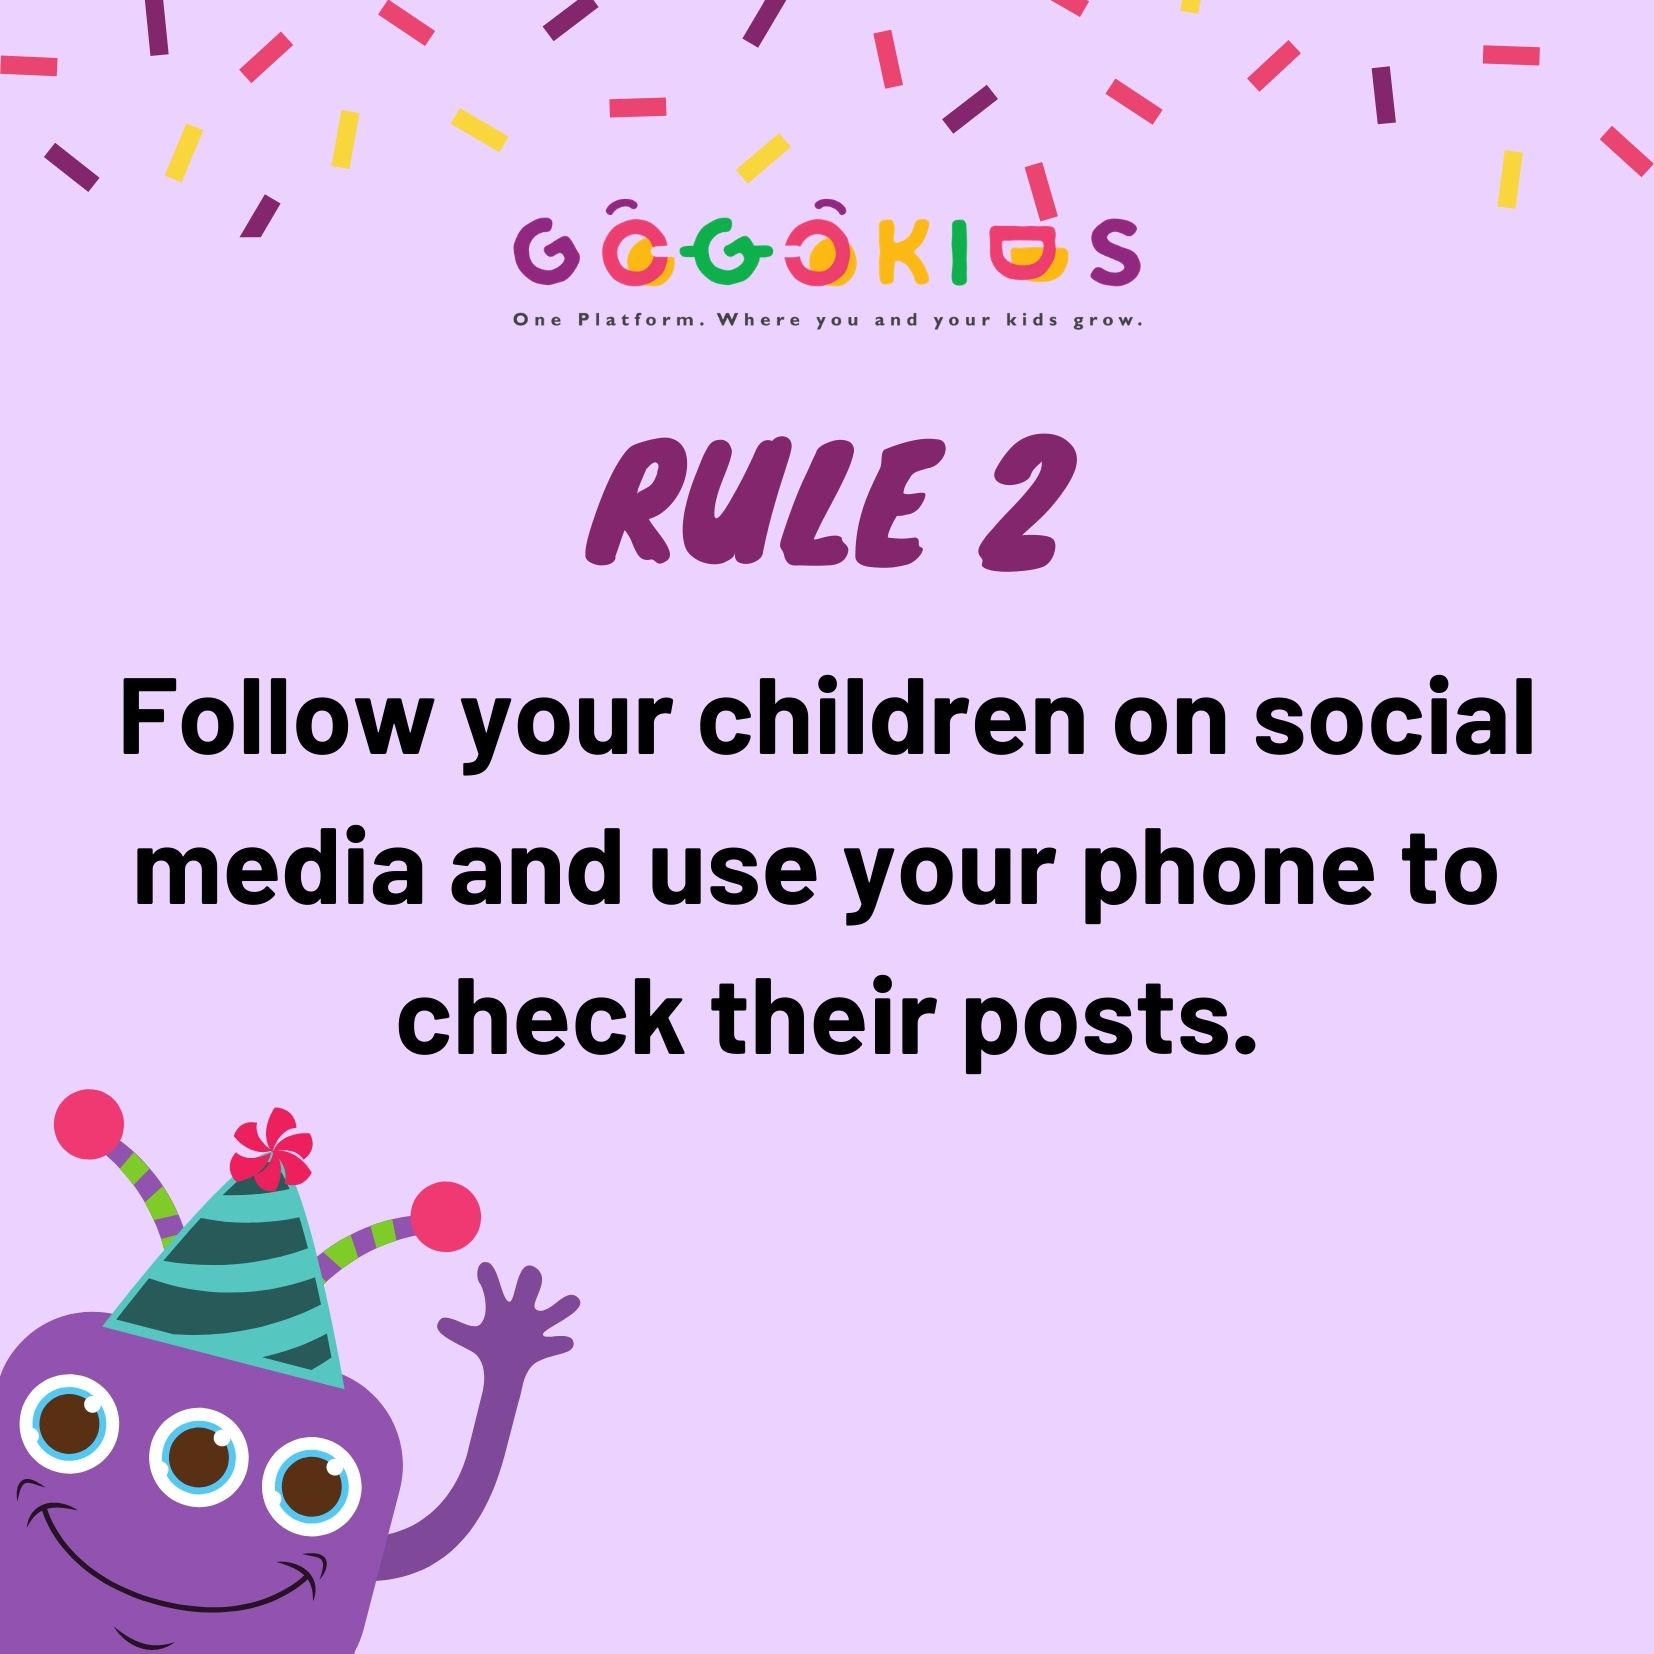 10 Cell Phone Rules for Parents | GogoKids Blog